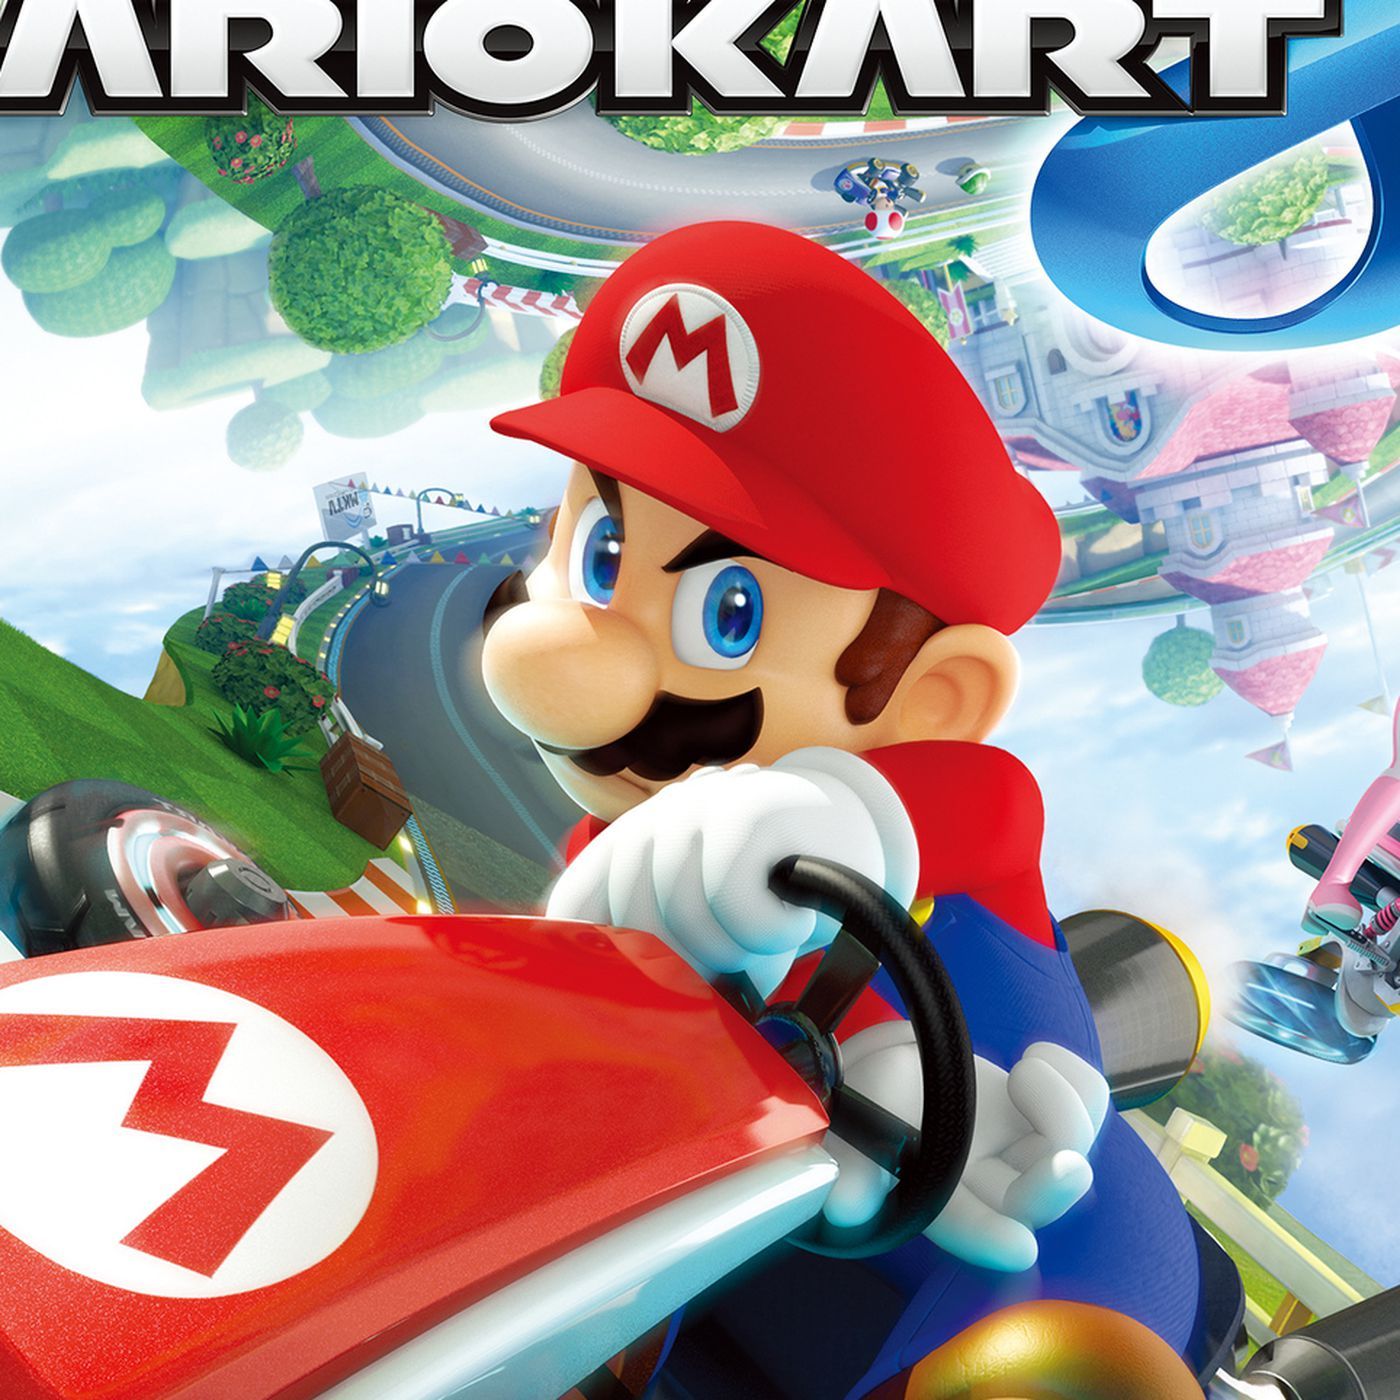 Mario Kart 8 Will Likely Be The Worst Selling Game In Franchise